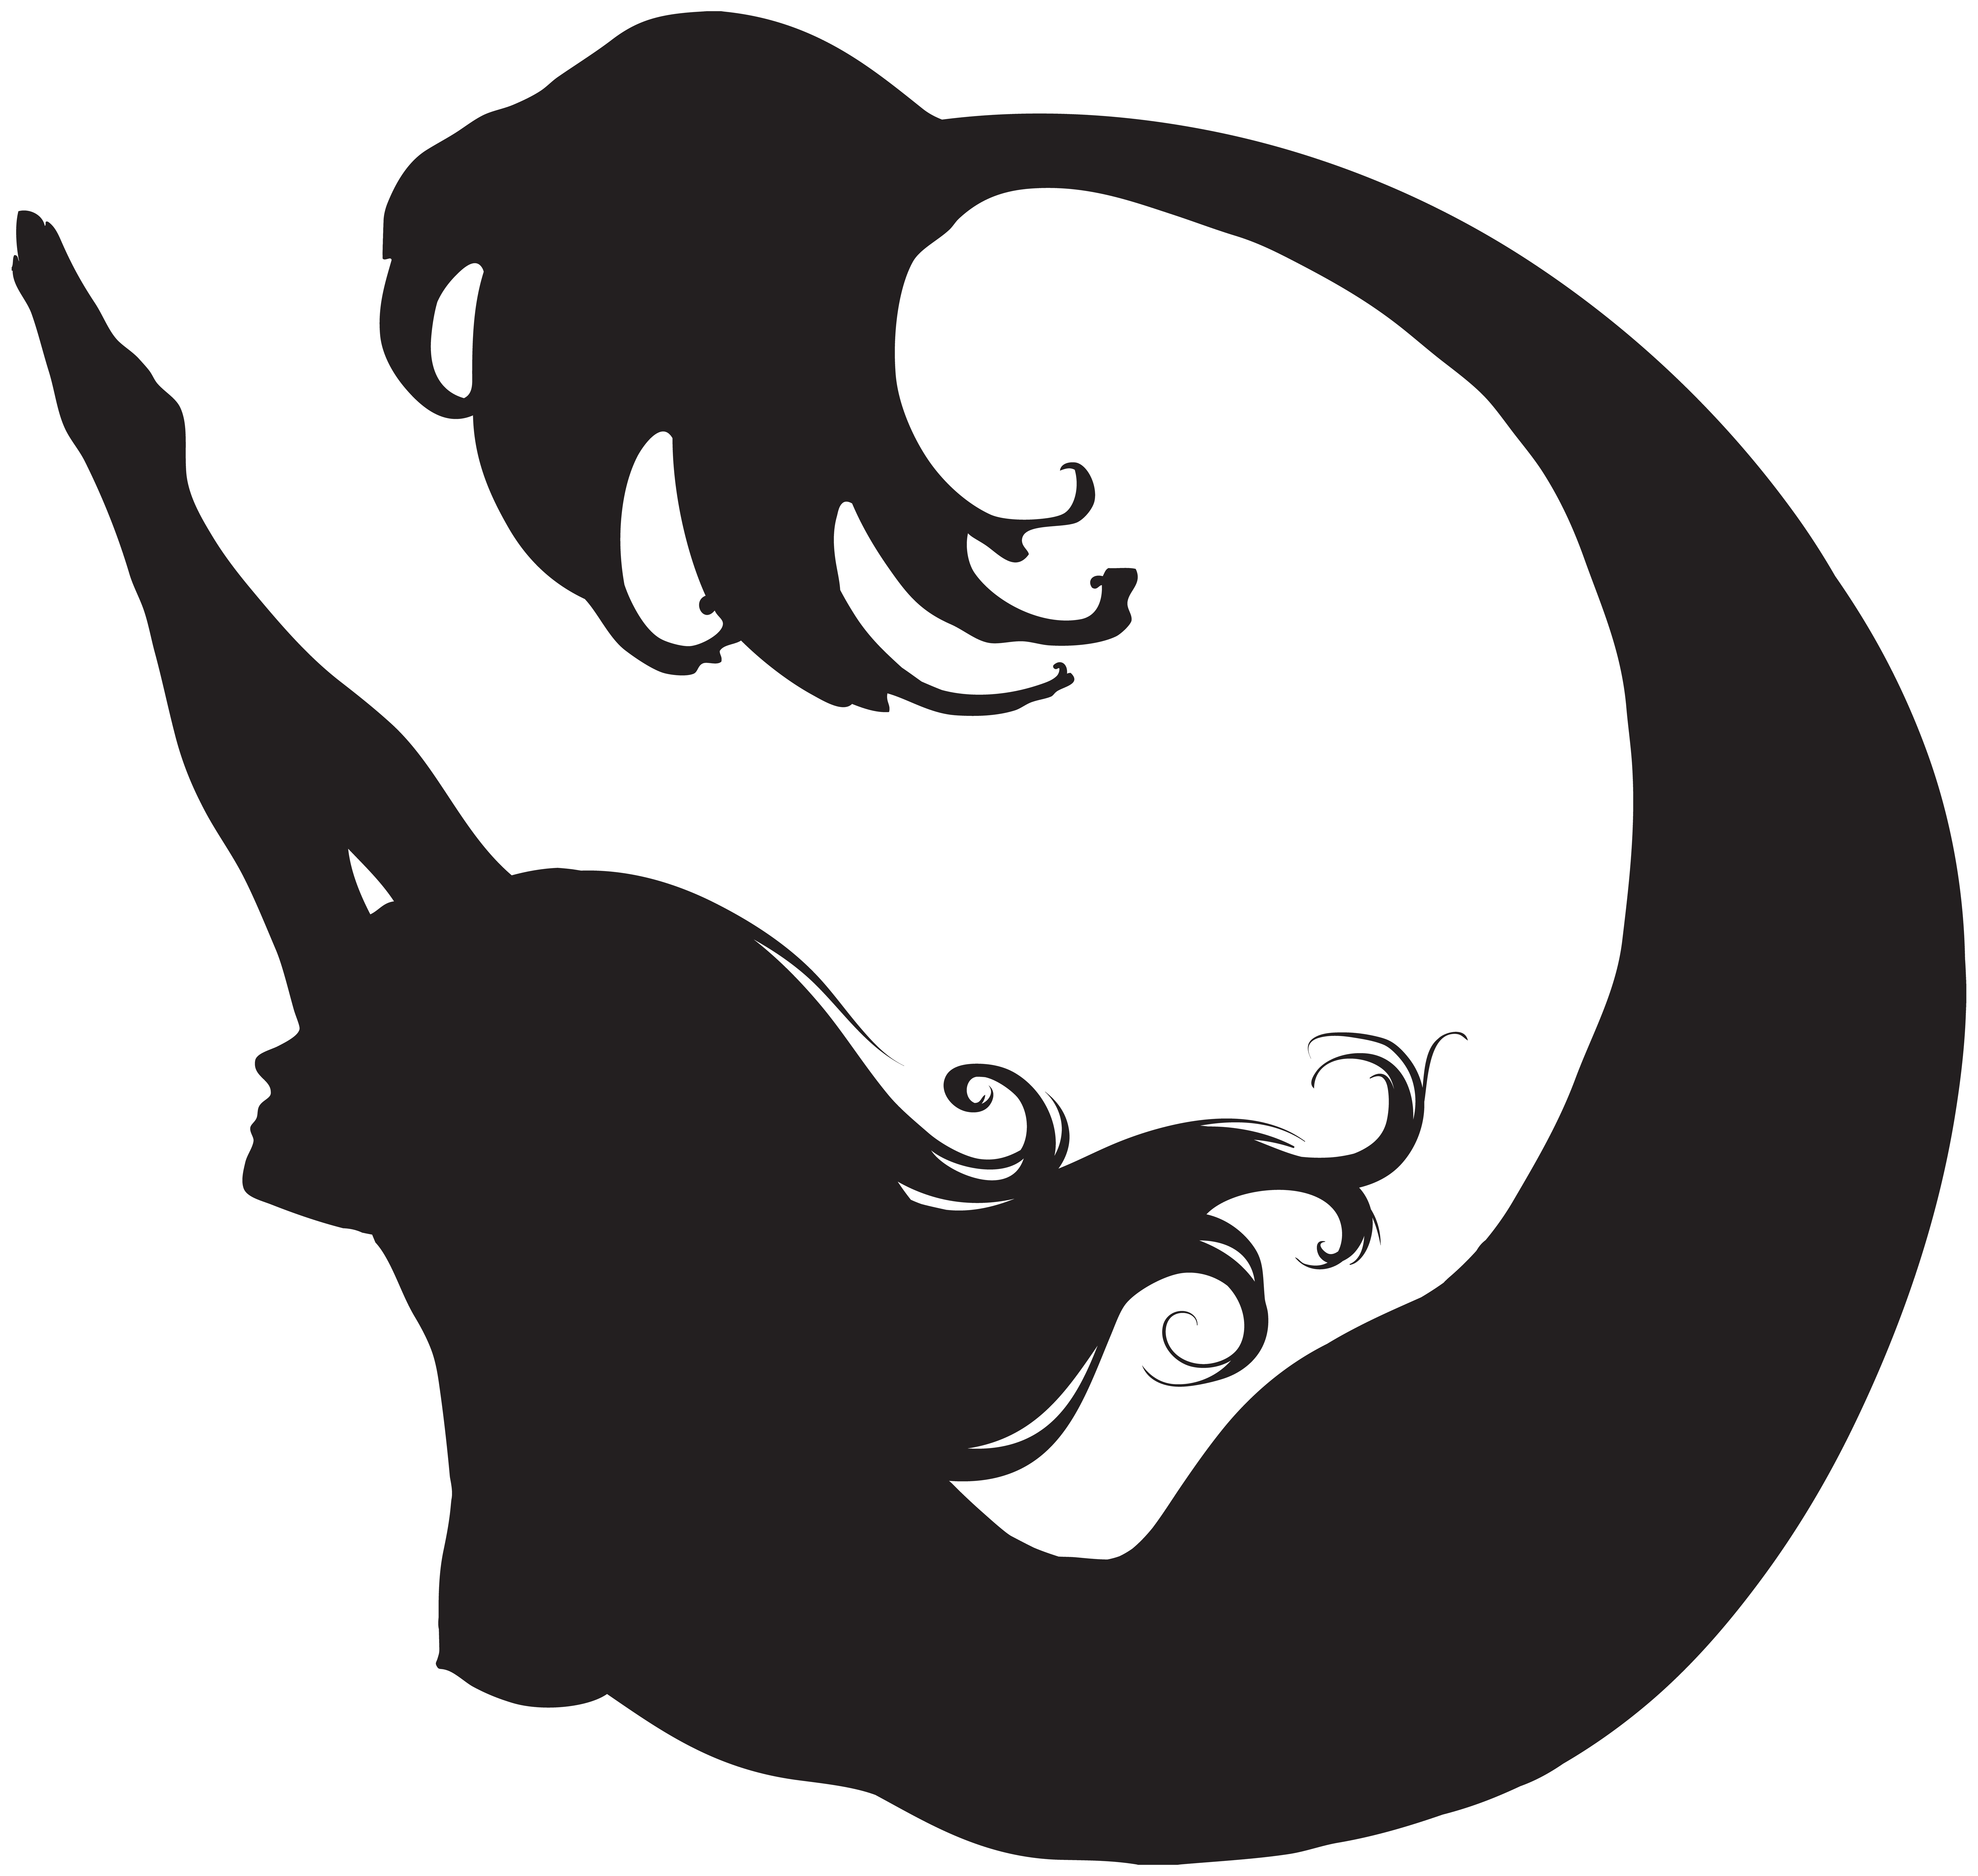 Swimming mermaid silhouette png. Hands clipart surfer